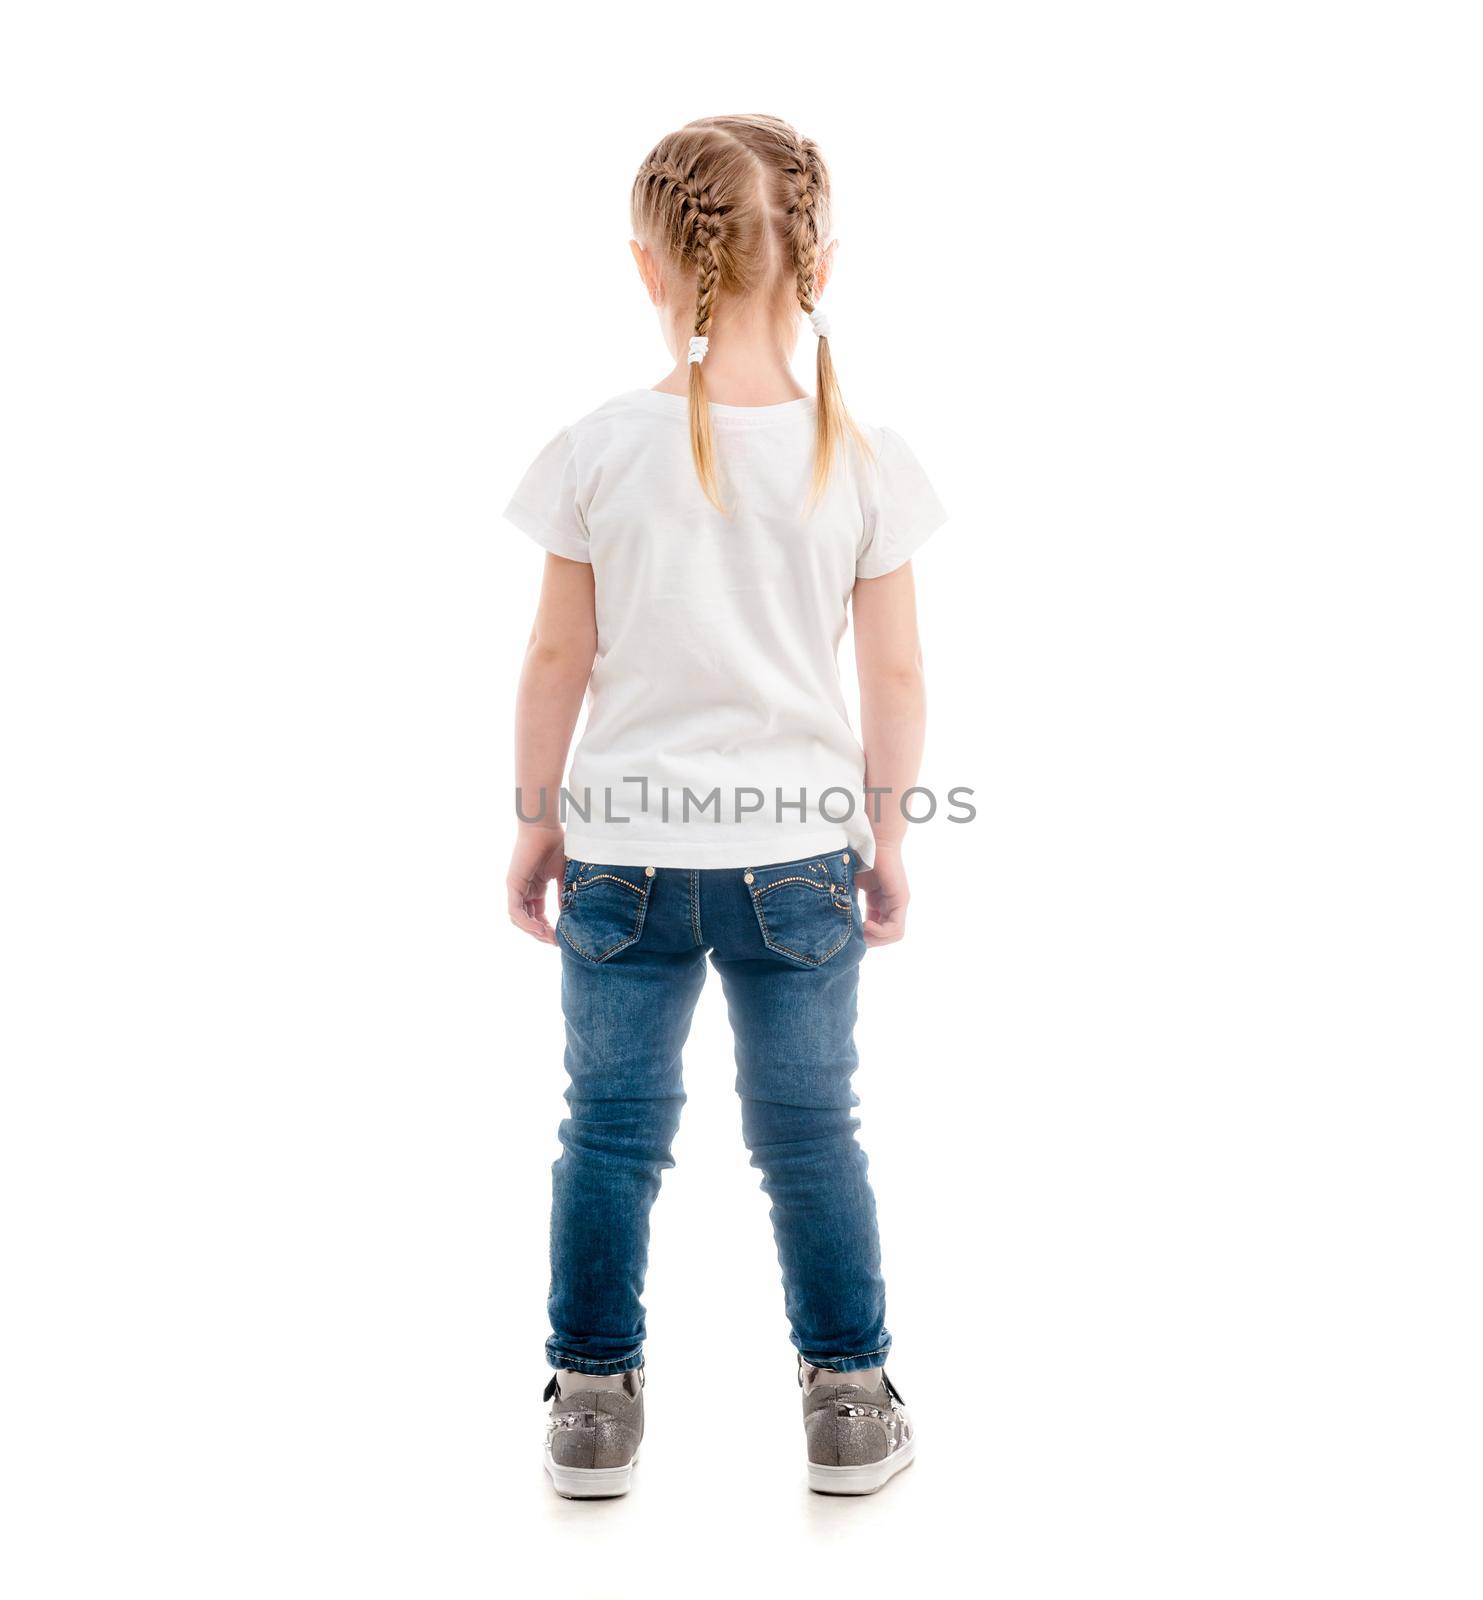 Small child standing with her back turned, wearing white t-shirt and blue jeans, isolated